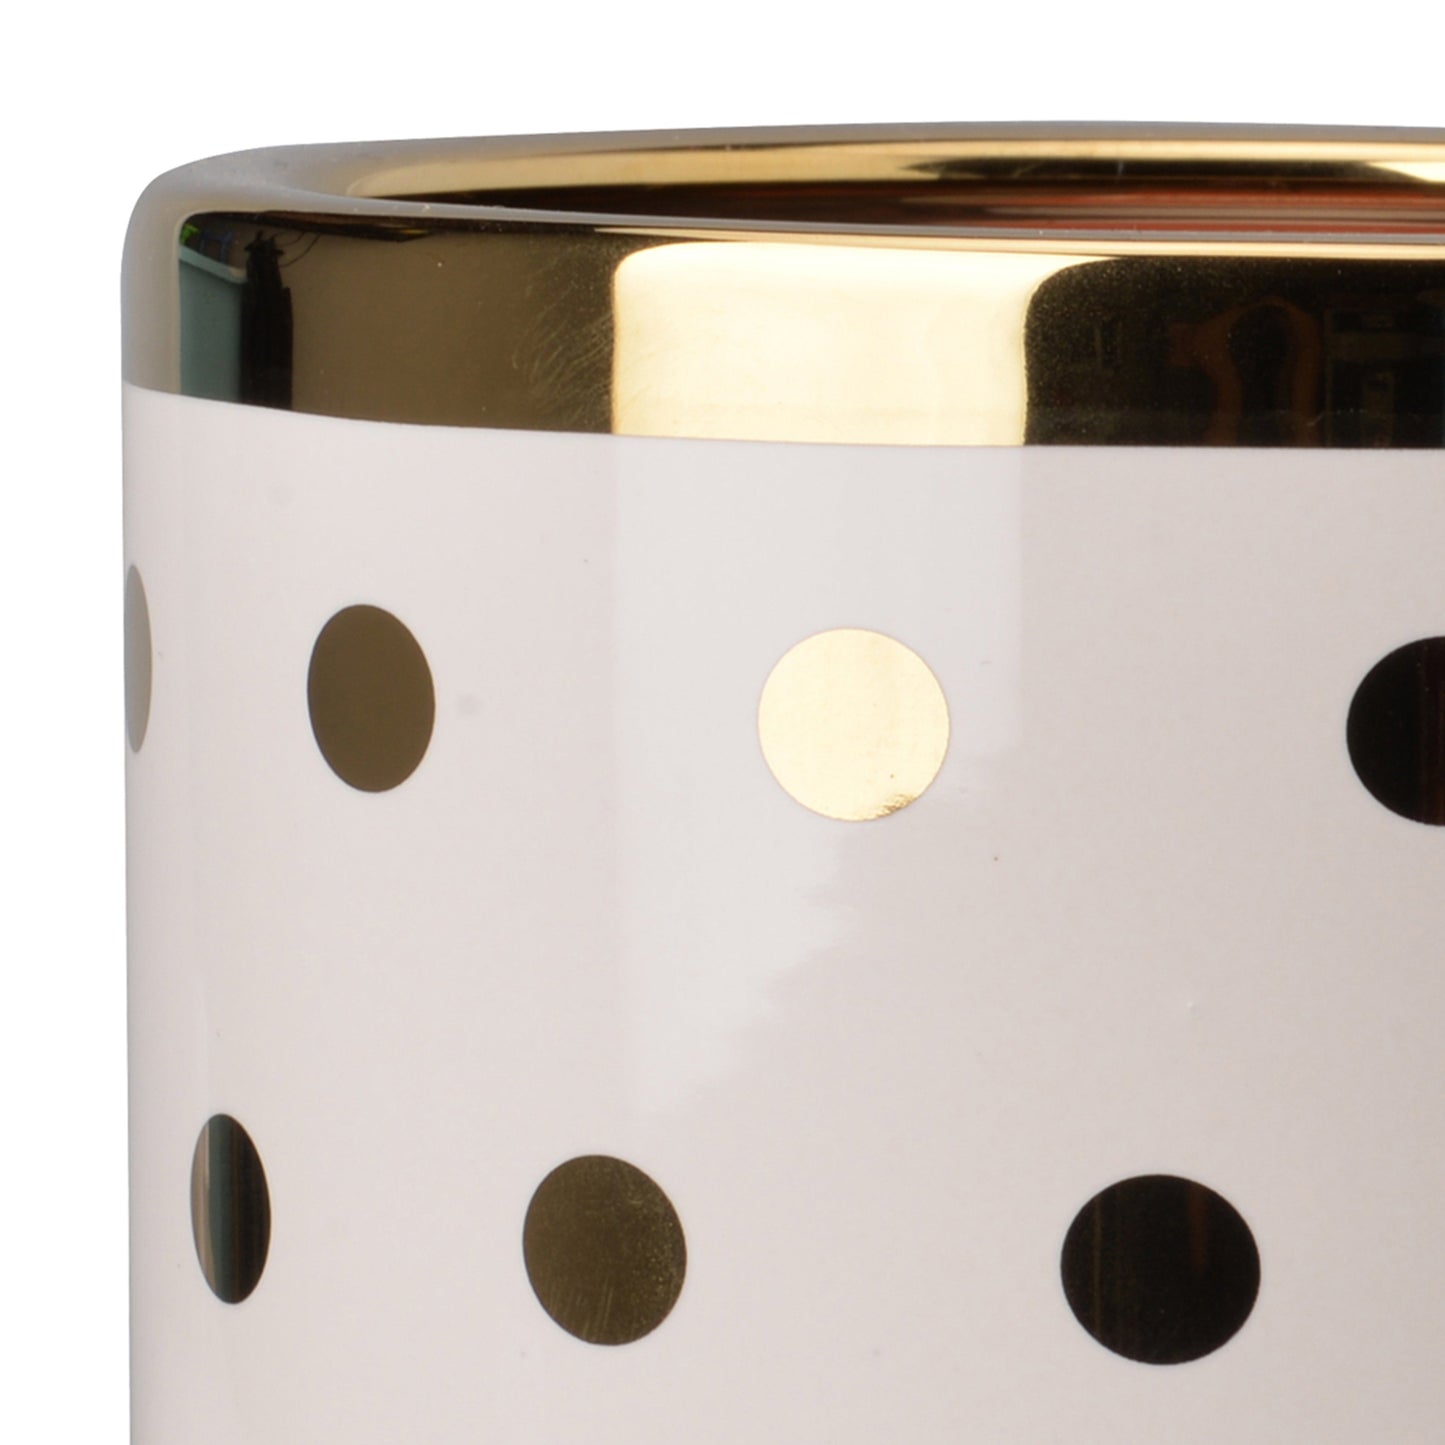 Ceramic Cylindrical Planter with Polka Dots Pattern, White and Gold - BM202244